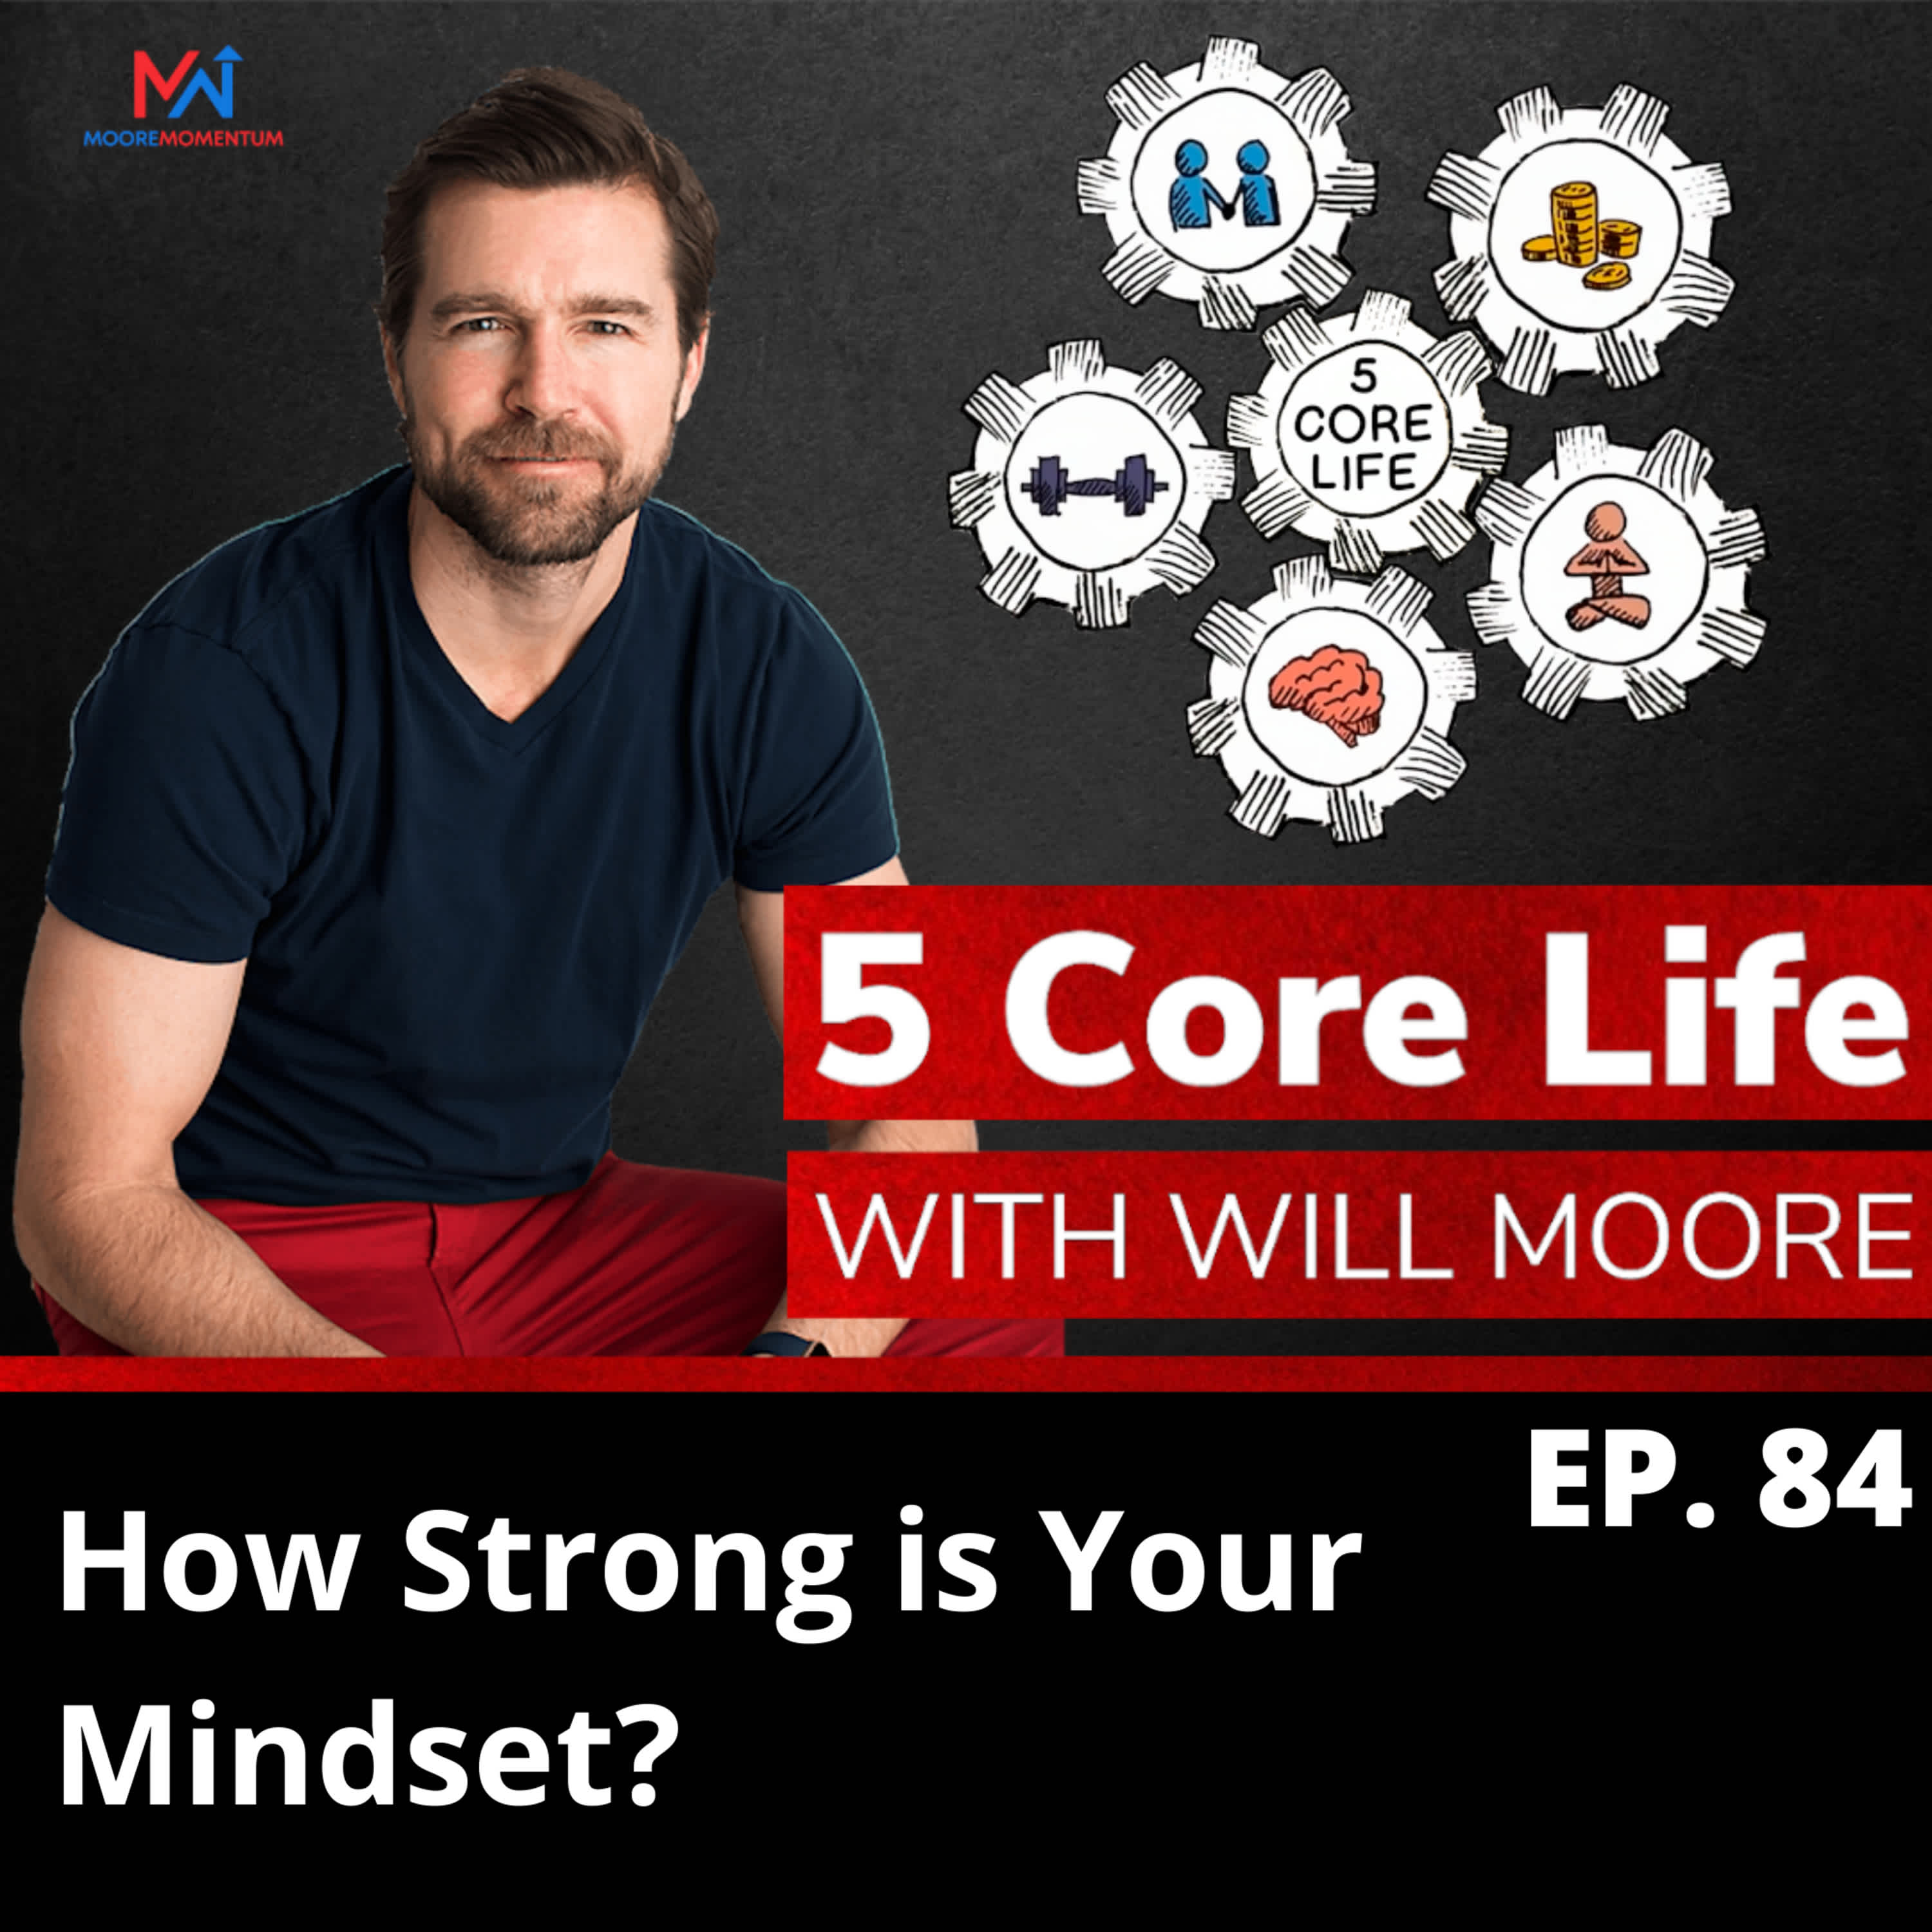 How Strong is Your Mindset? Gamify Your Life!